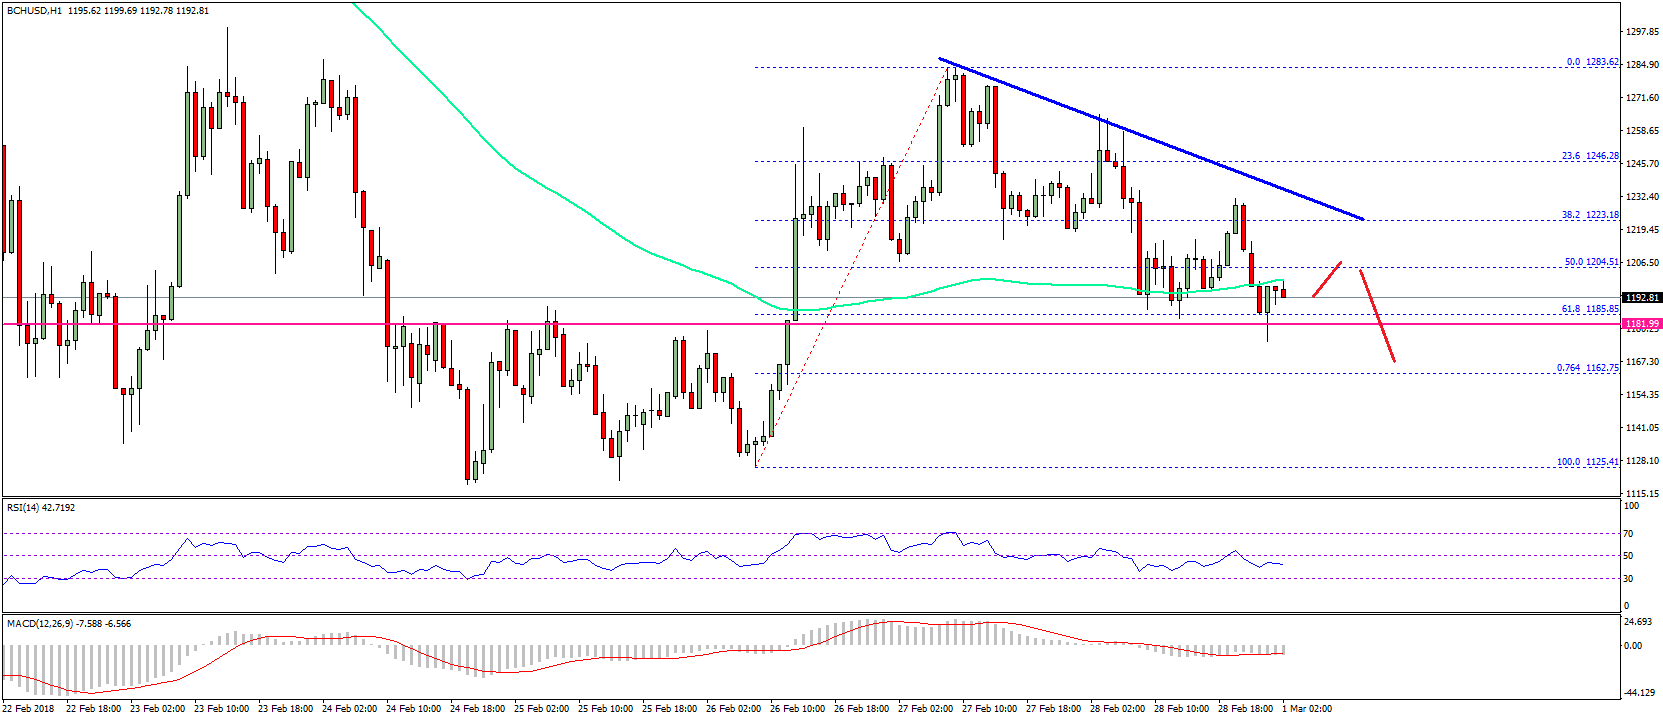 Bitcoin Cash Price Technical Analysis – BCH/USD Could Slide Further